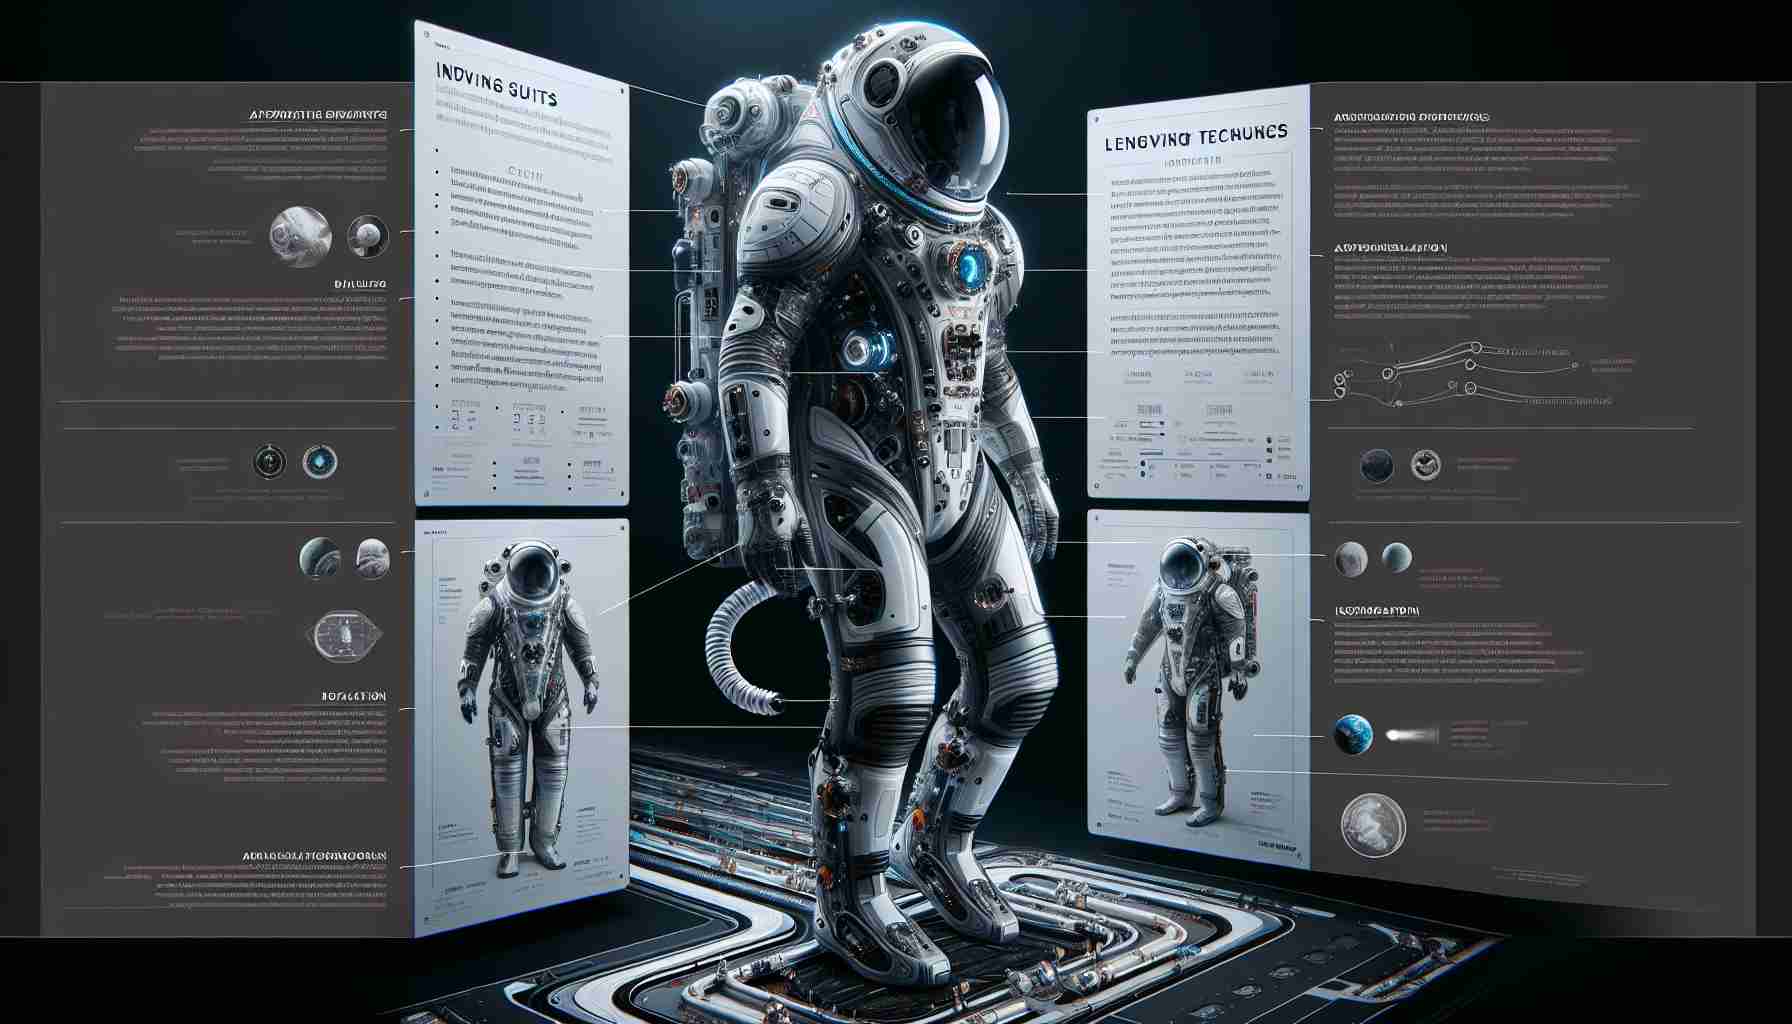 A detailed and high definition portrayal of innovative space suits, specifically designed for lengthy space missions. The image should capture the intricacy and uniqueness of these suits, showcasing their advanced technology and their long lifespan. They are aesthetically futuristic, featuring sleek designs that anticipate the needs of astronauts on enduring journeys. Additionally, consider the unforgiving environment of space, with factors like vacuum, radiation, and extreme temperatures dictating the novel ingenuities of these suits.